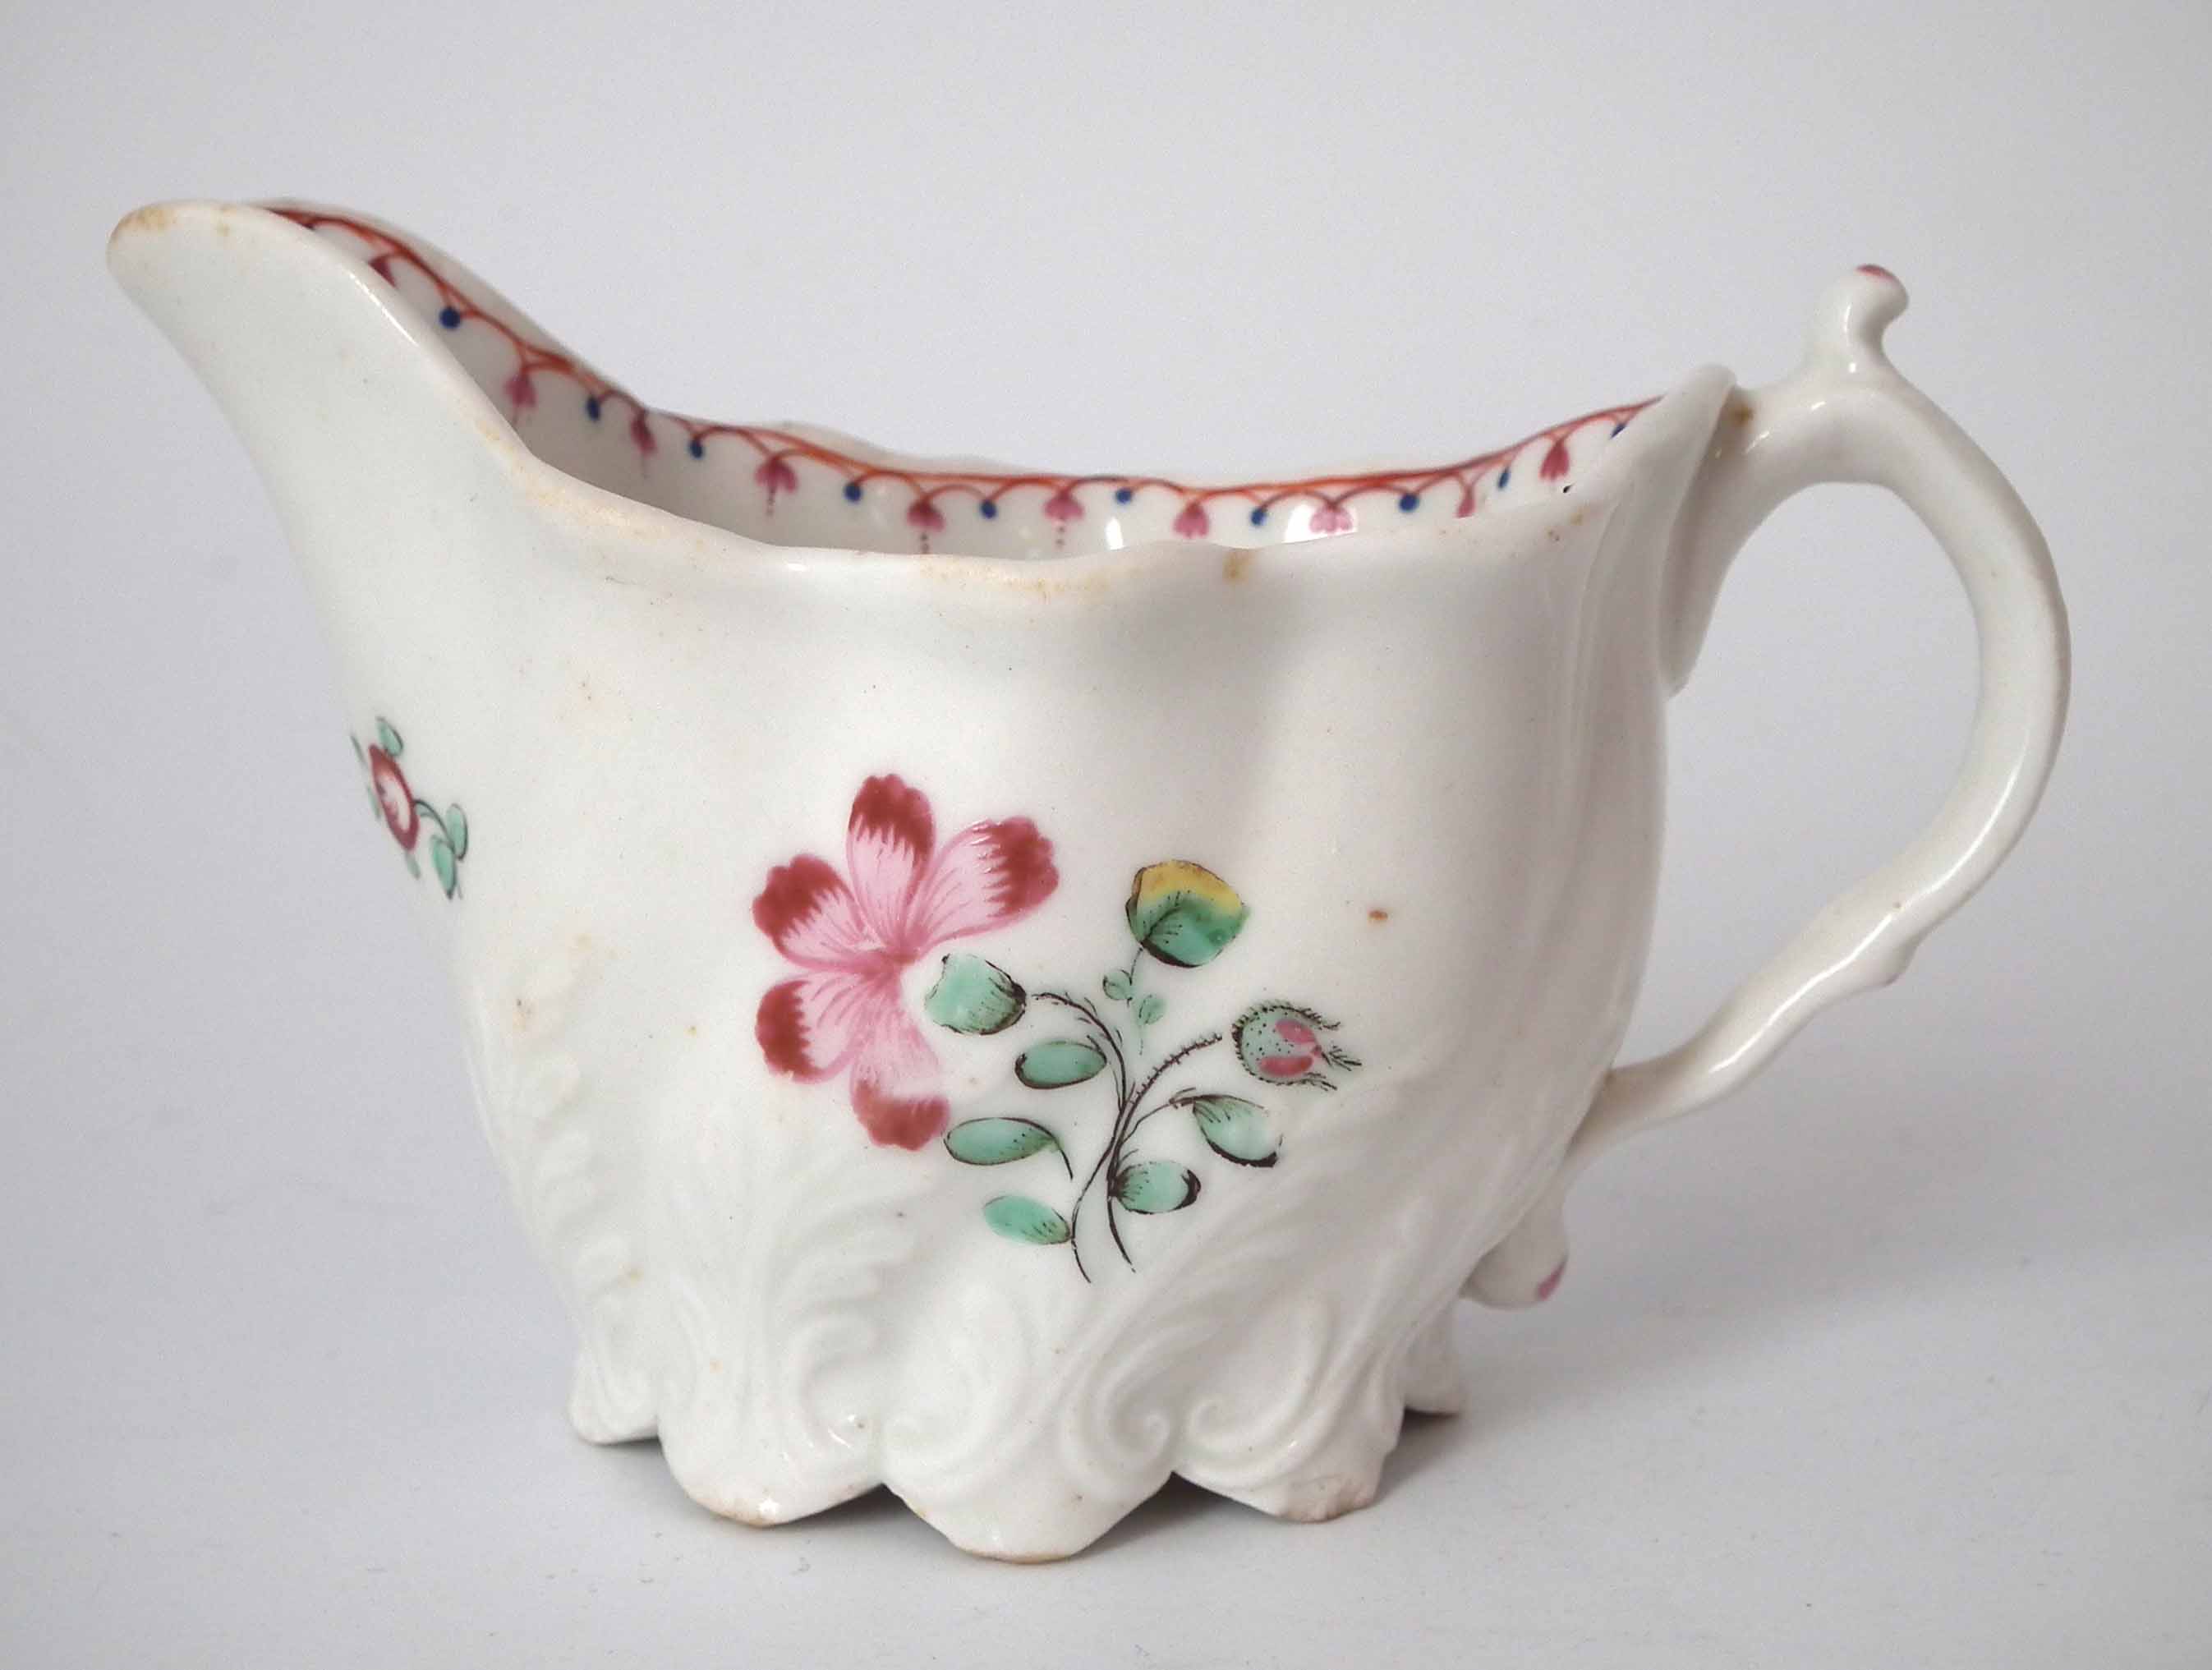 Caughley Low Chelsea Ewer circa 1790, painted with flora and moulded with acanthus leaves, 11cm wide